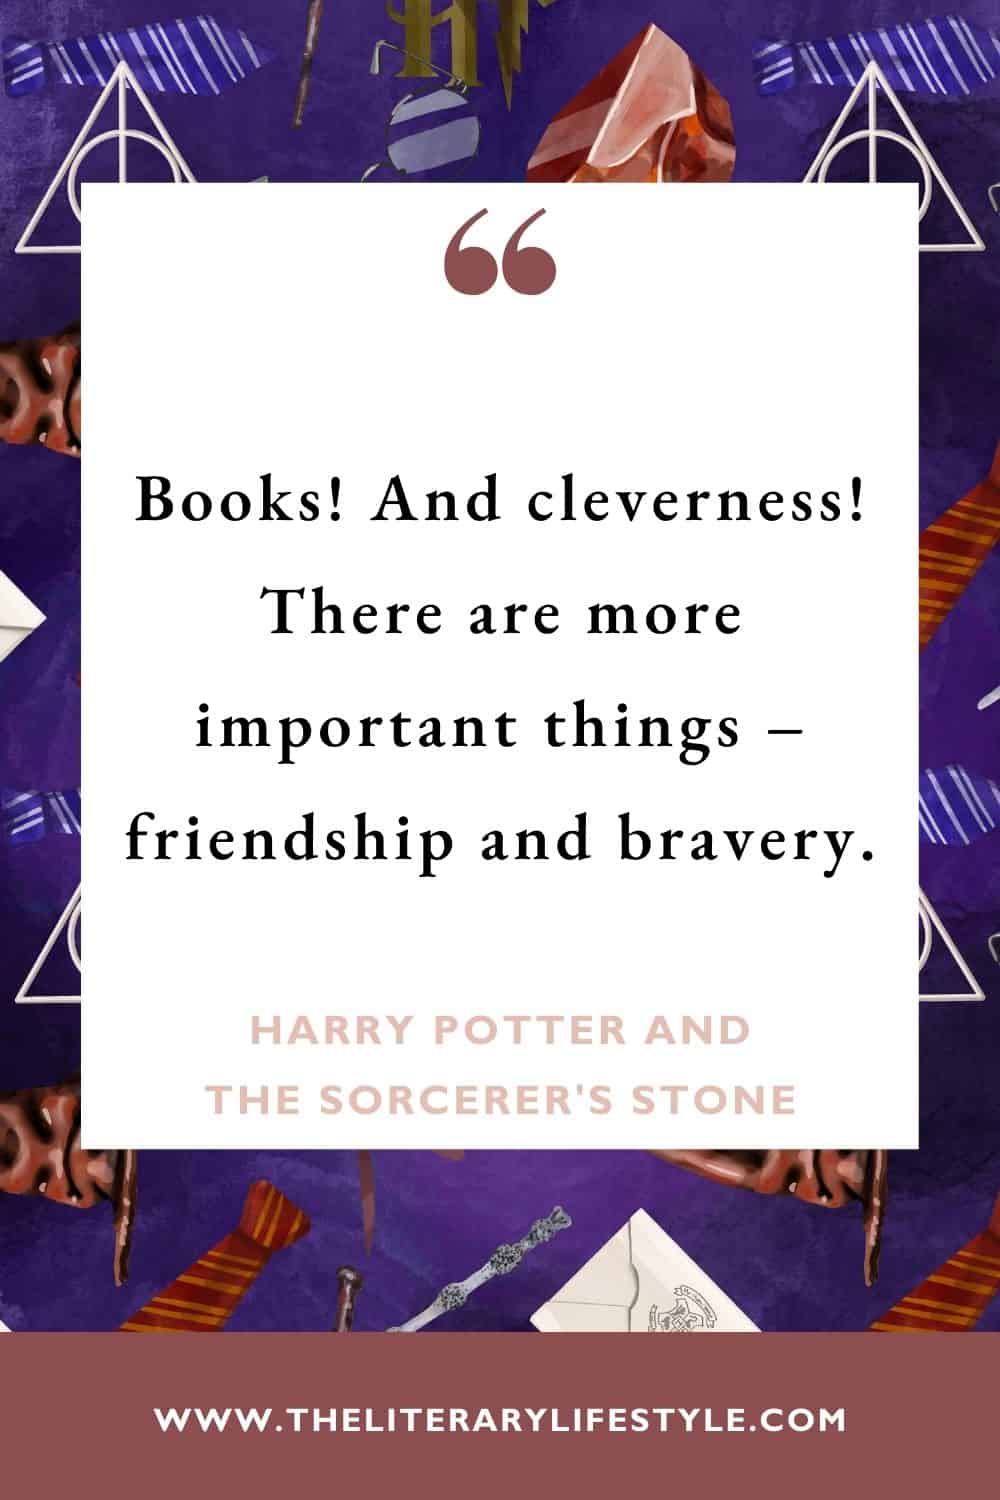 friendship quote by hermione granger from harry potter and the sorcerer's stone